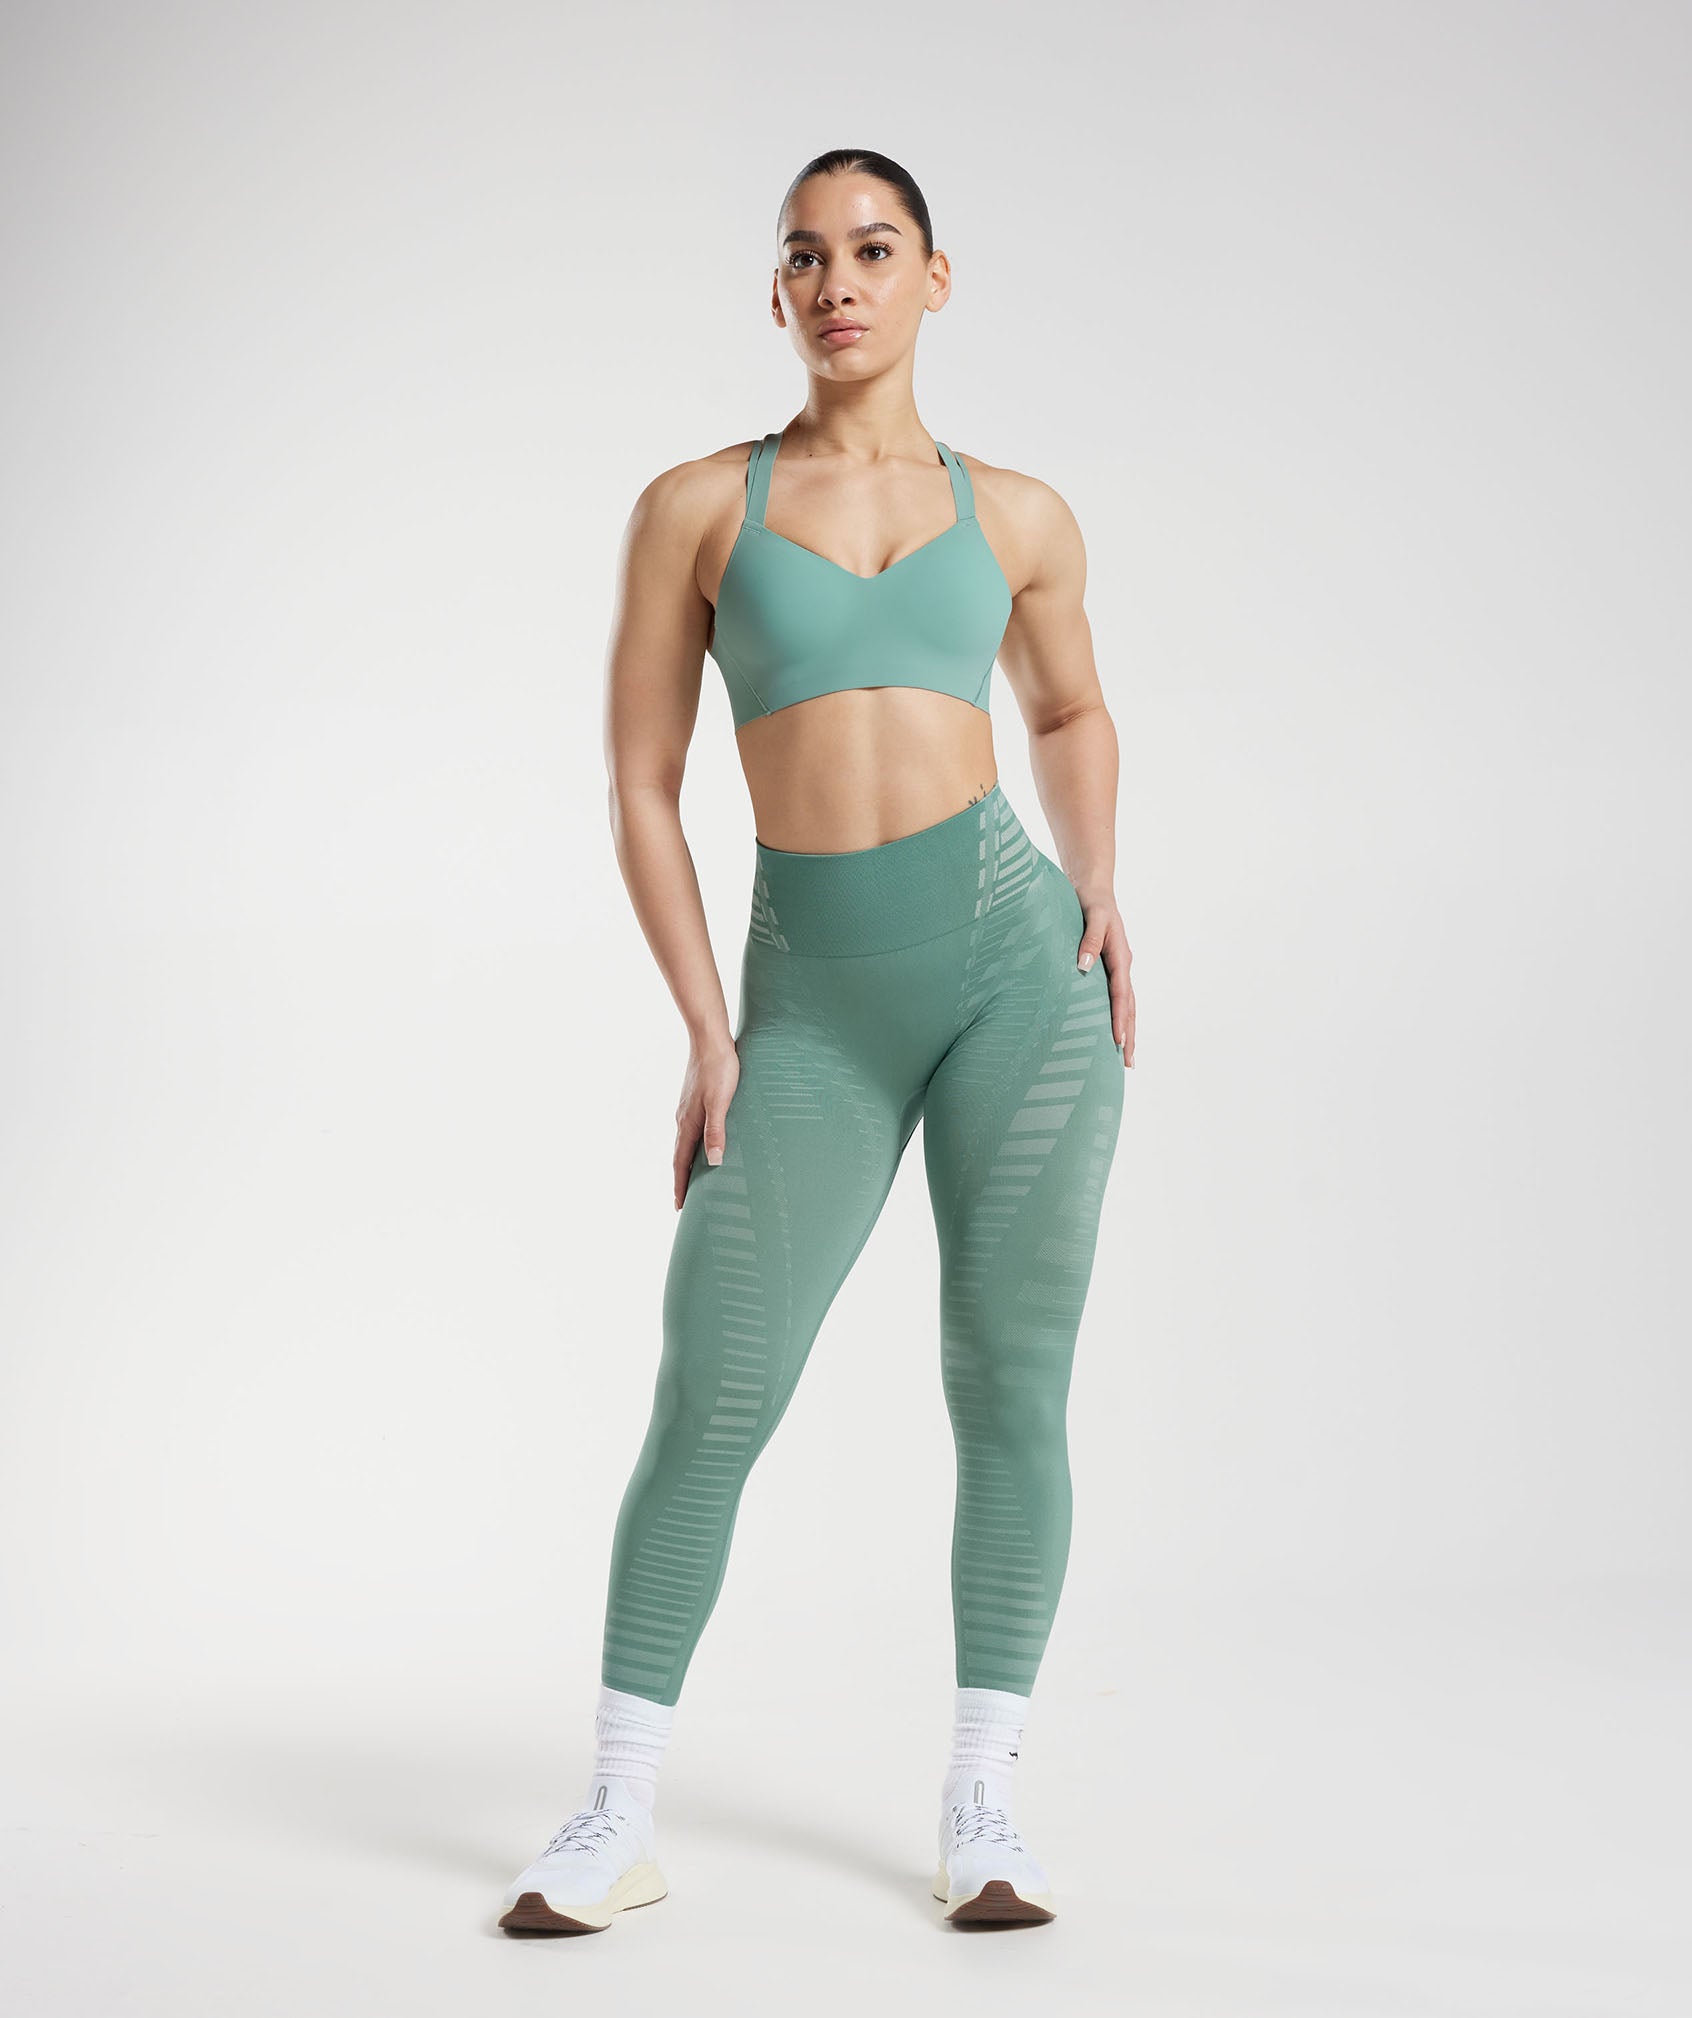 Apex Limit Sports Bra in Ink Teal - view 6